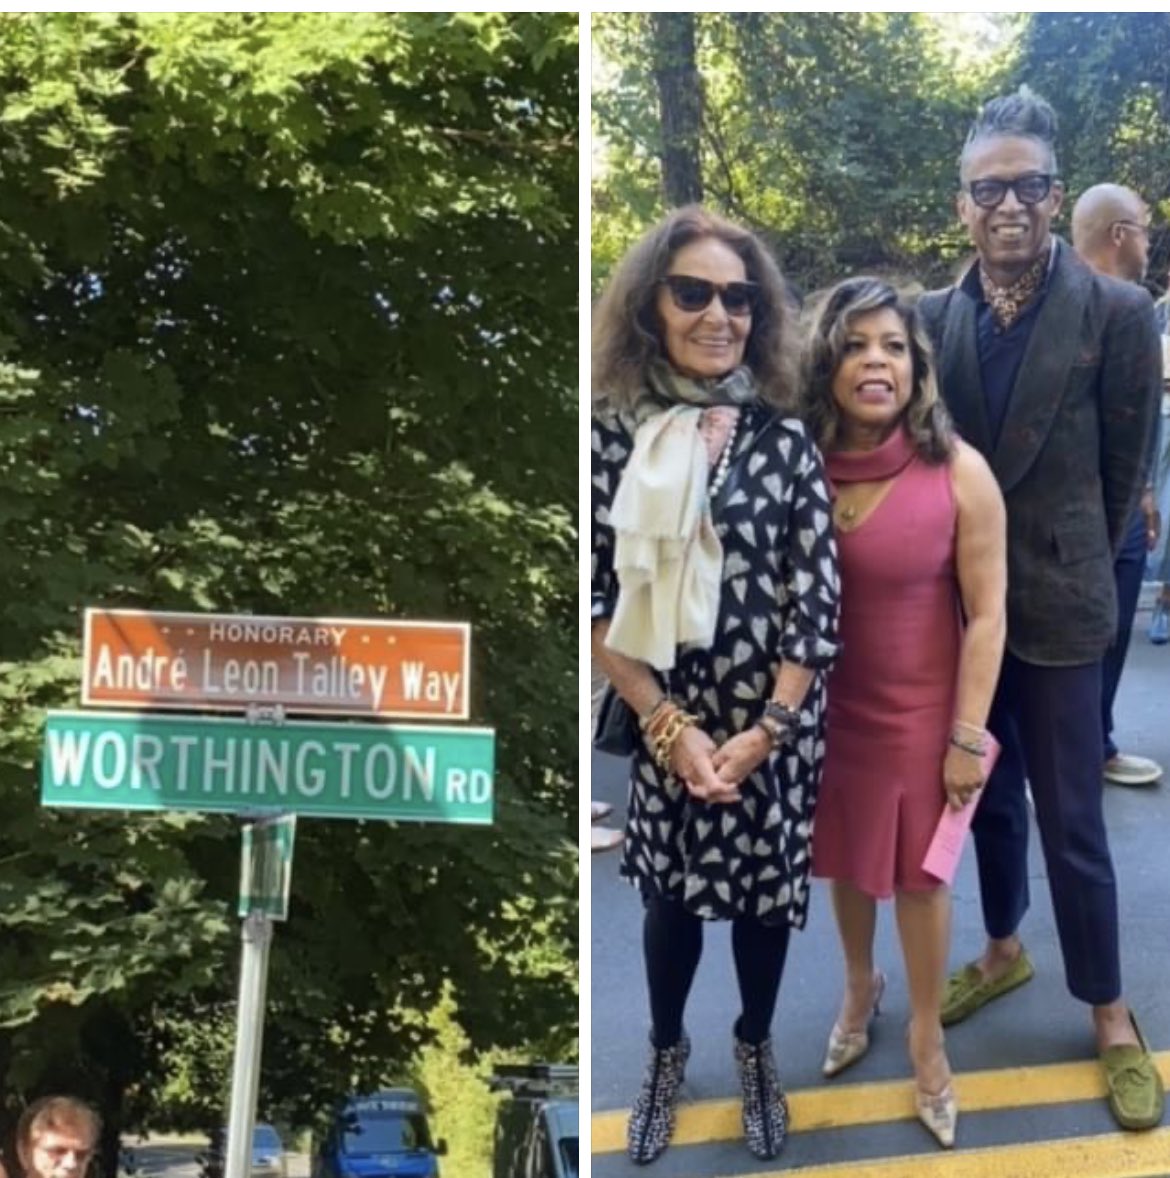 Nine months after Andre Leon Talley’s death the pioneering journalist had the Westchester county New York street that he lived on named in his honor. Dianne Von Furstenberg, Valerie Simpson, B Michael and more ❤ attend to show their love and support for this historic moment.